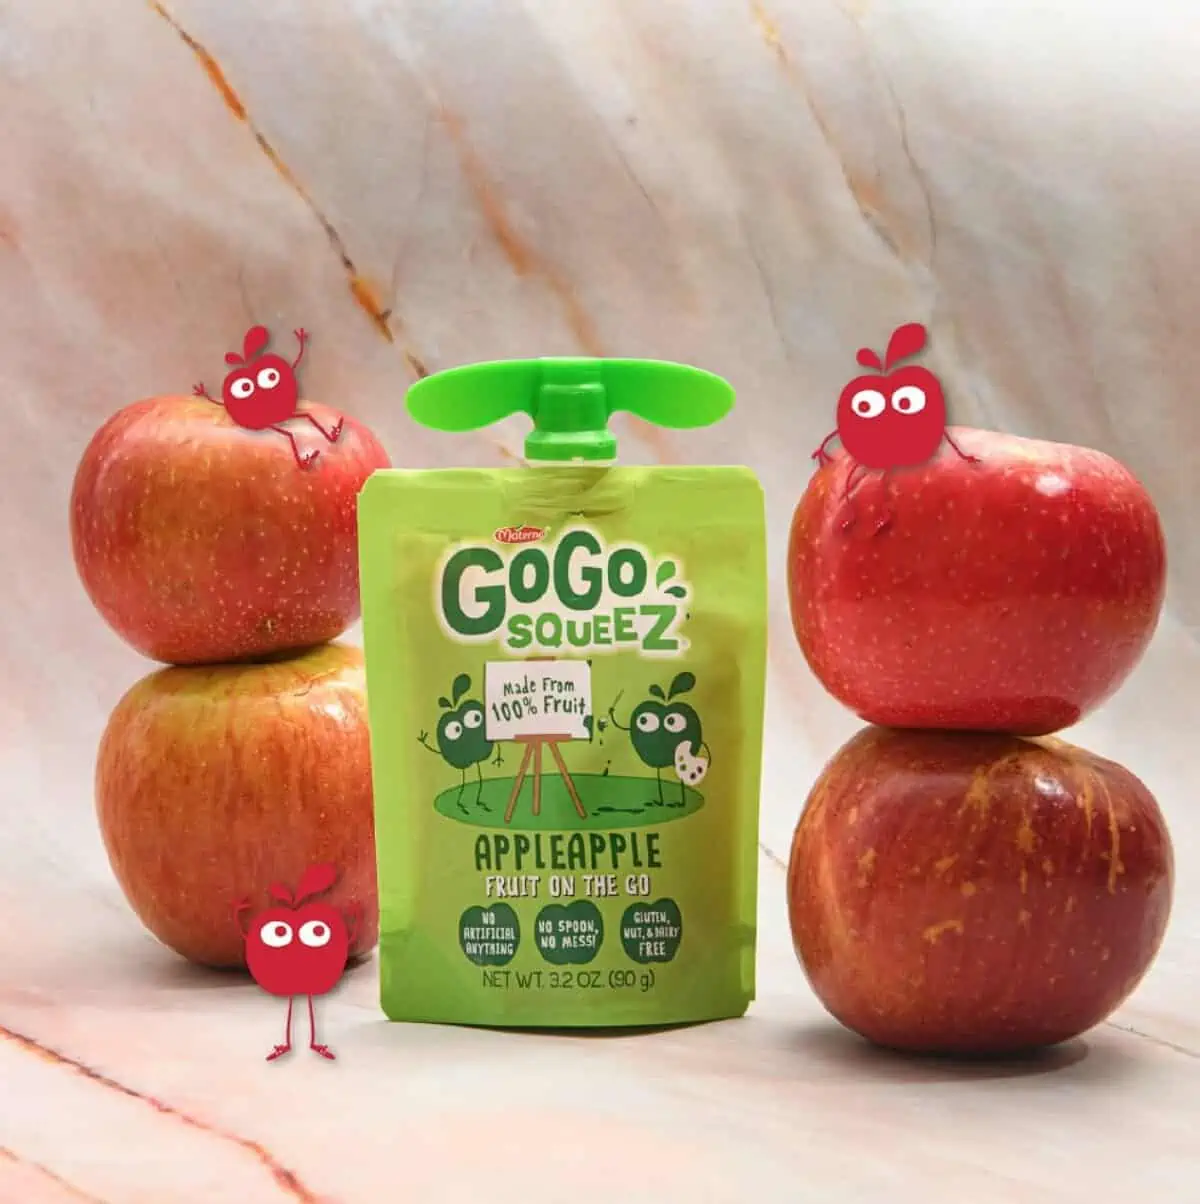 A green Gogo Squeez applesauce pouch standing between two piles of red apples with cartoon characters of apples around them.